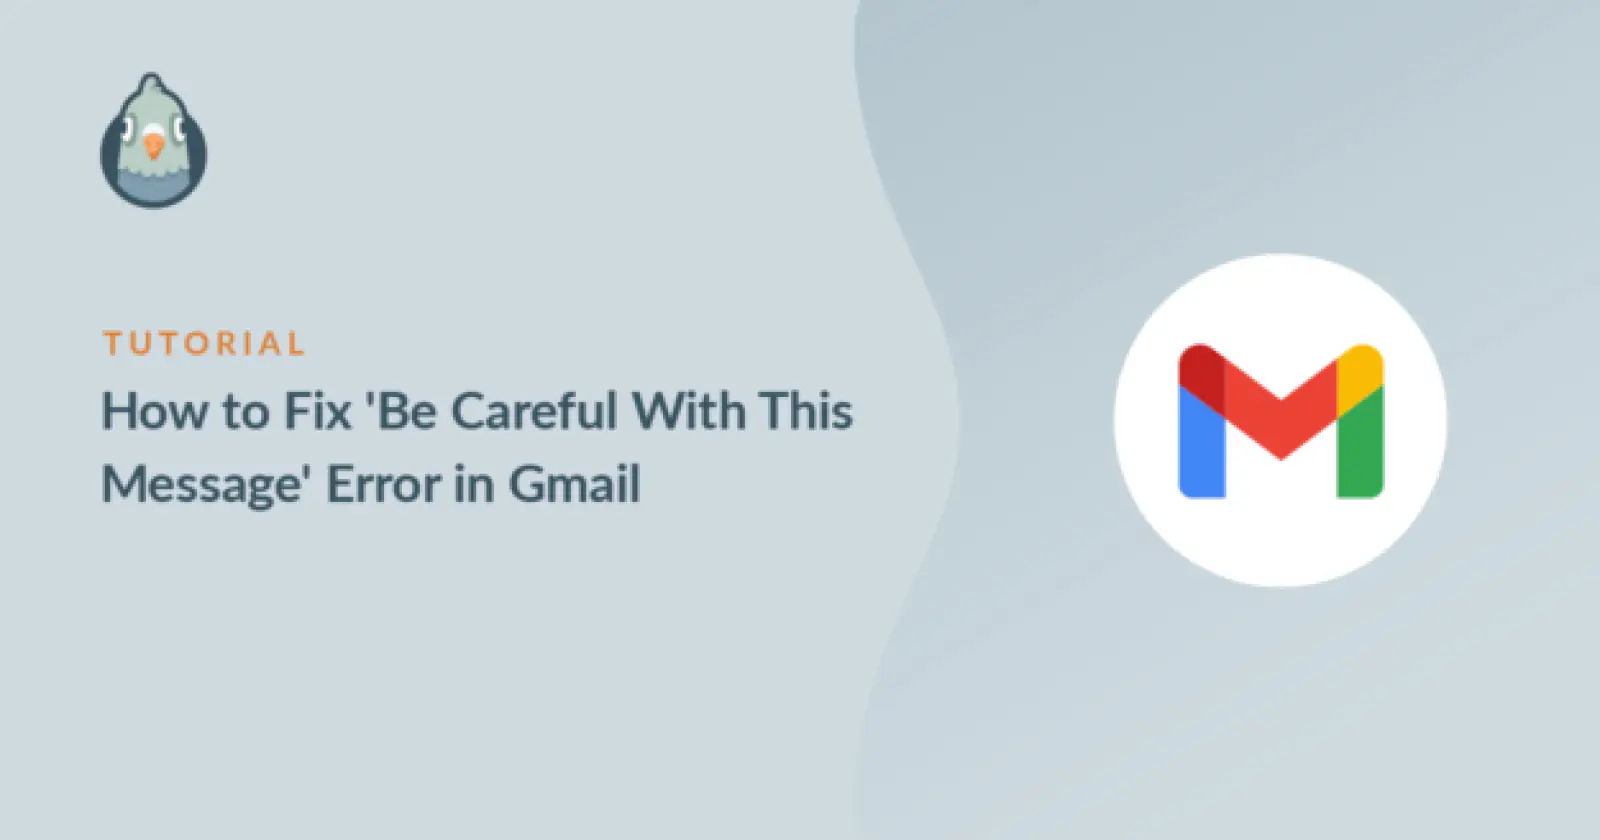 Gmail users be careful! If this work is not done soon, Google will close your account